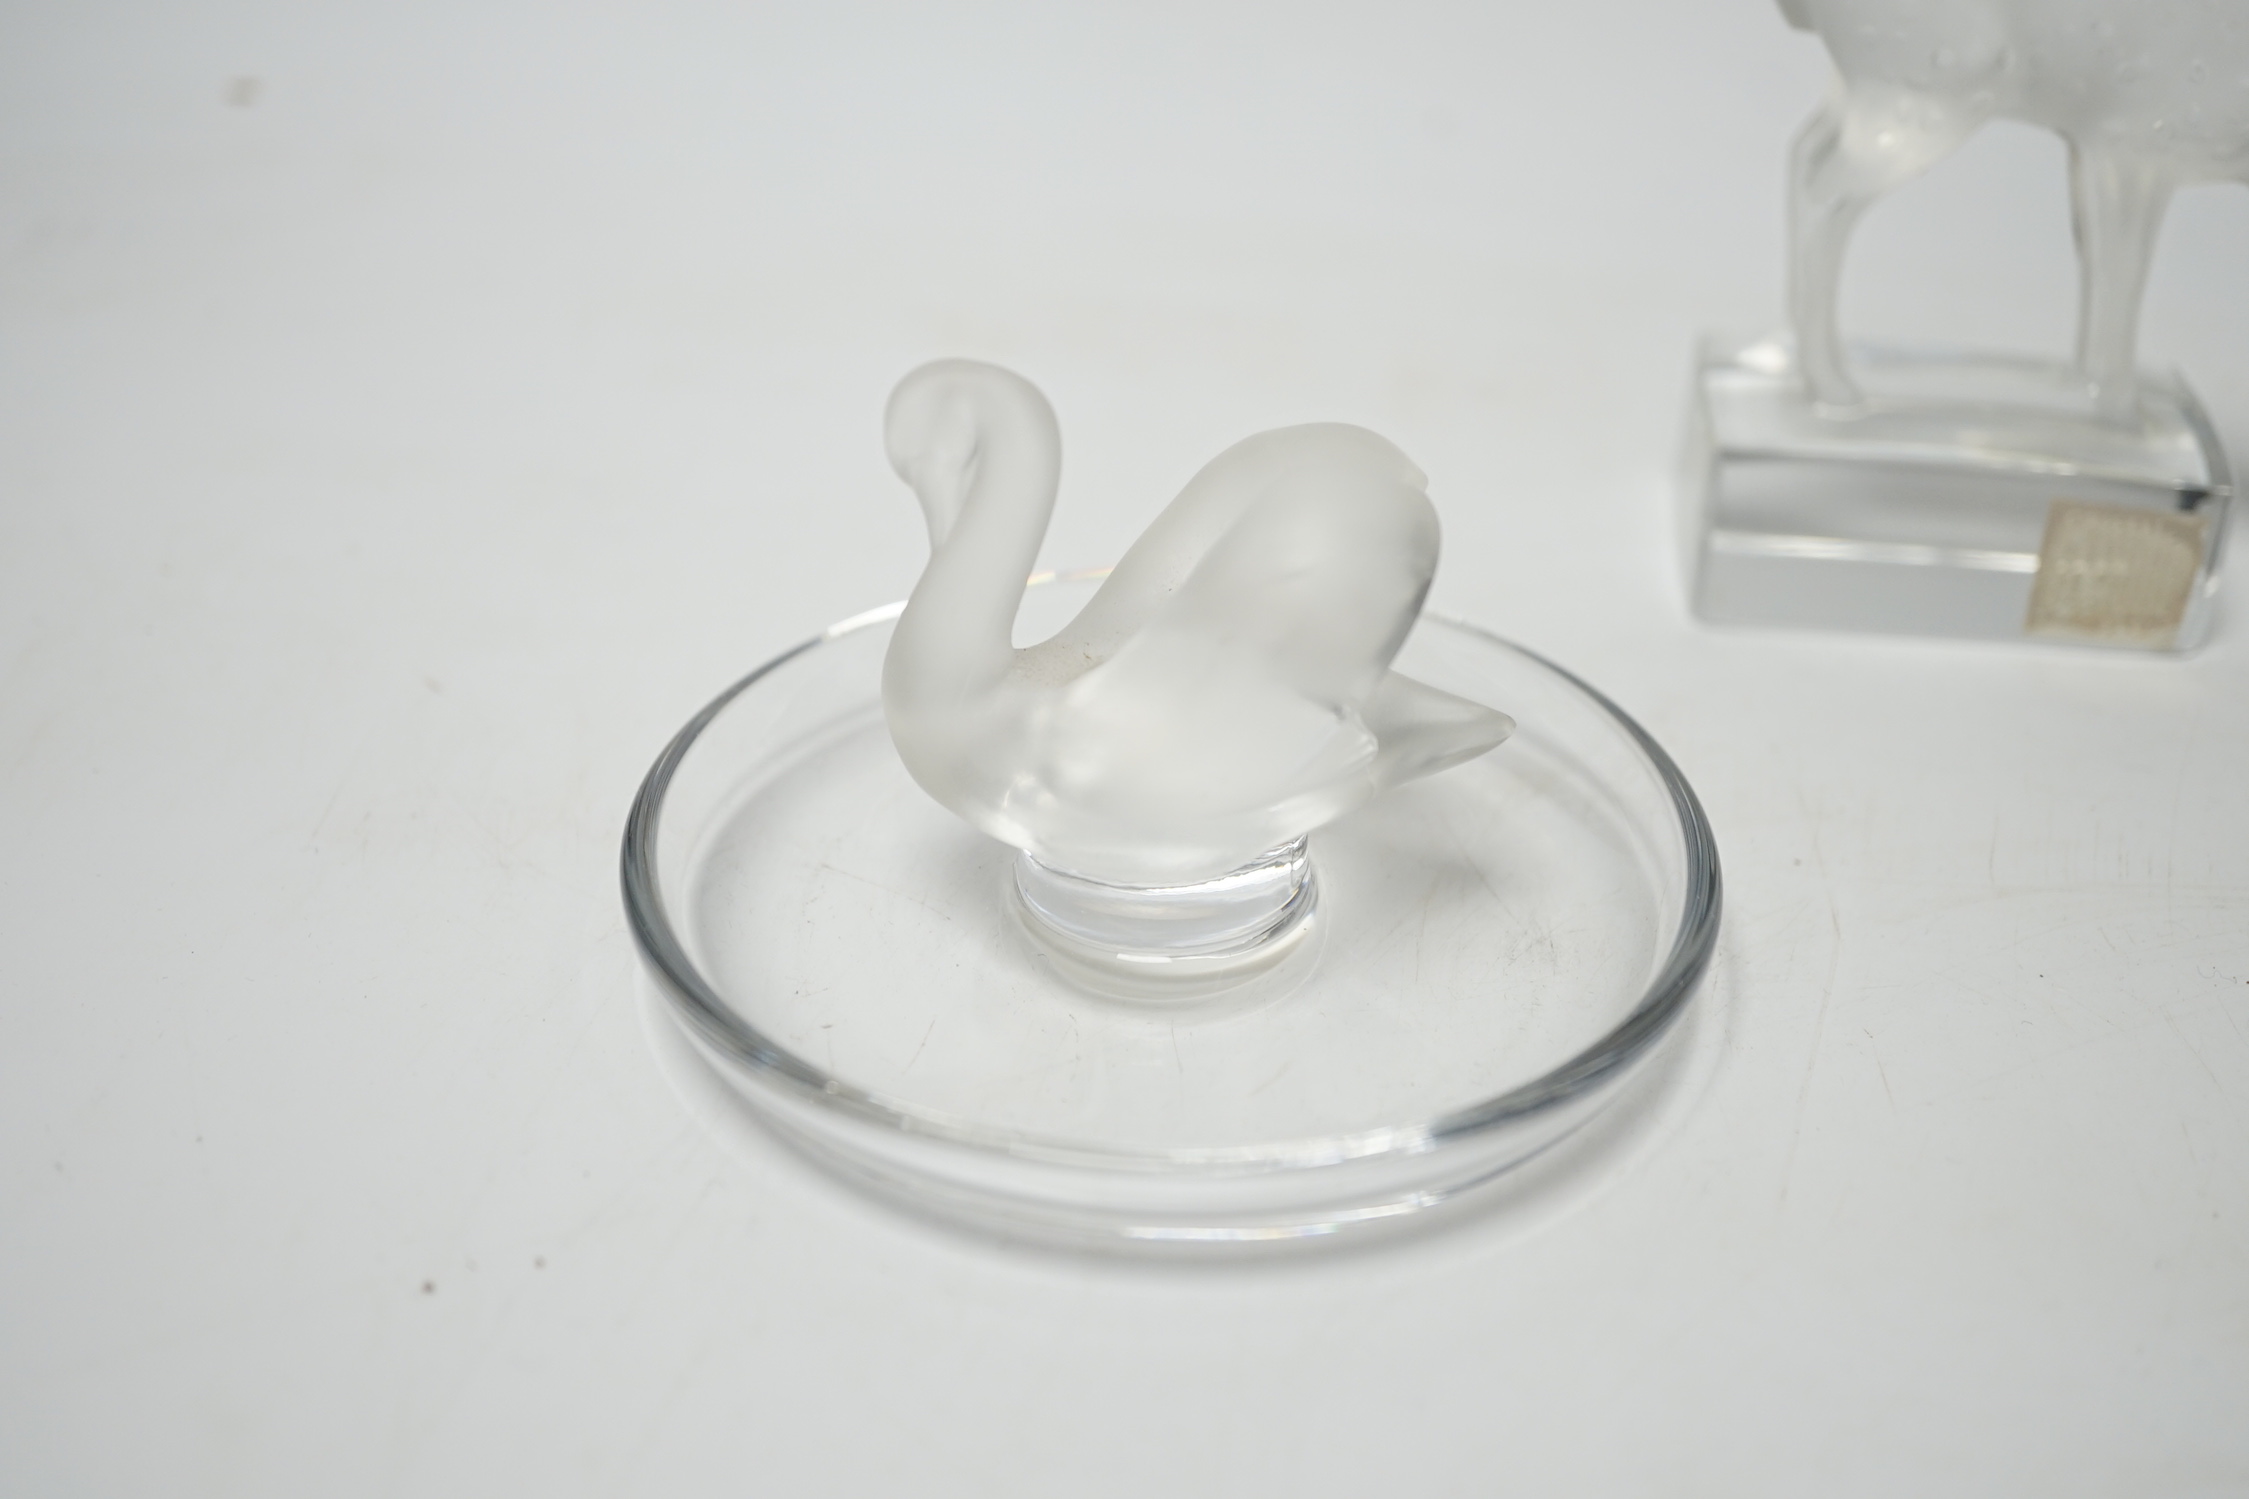 Rene Lalique - two glass pin dishes modelled as a swan and a fish together with a paperweight modelled as a giraffe, signed ‘Lalique France’ to base, tallest 9.5cm high (3)